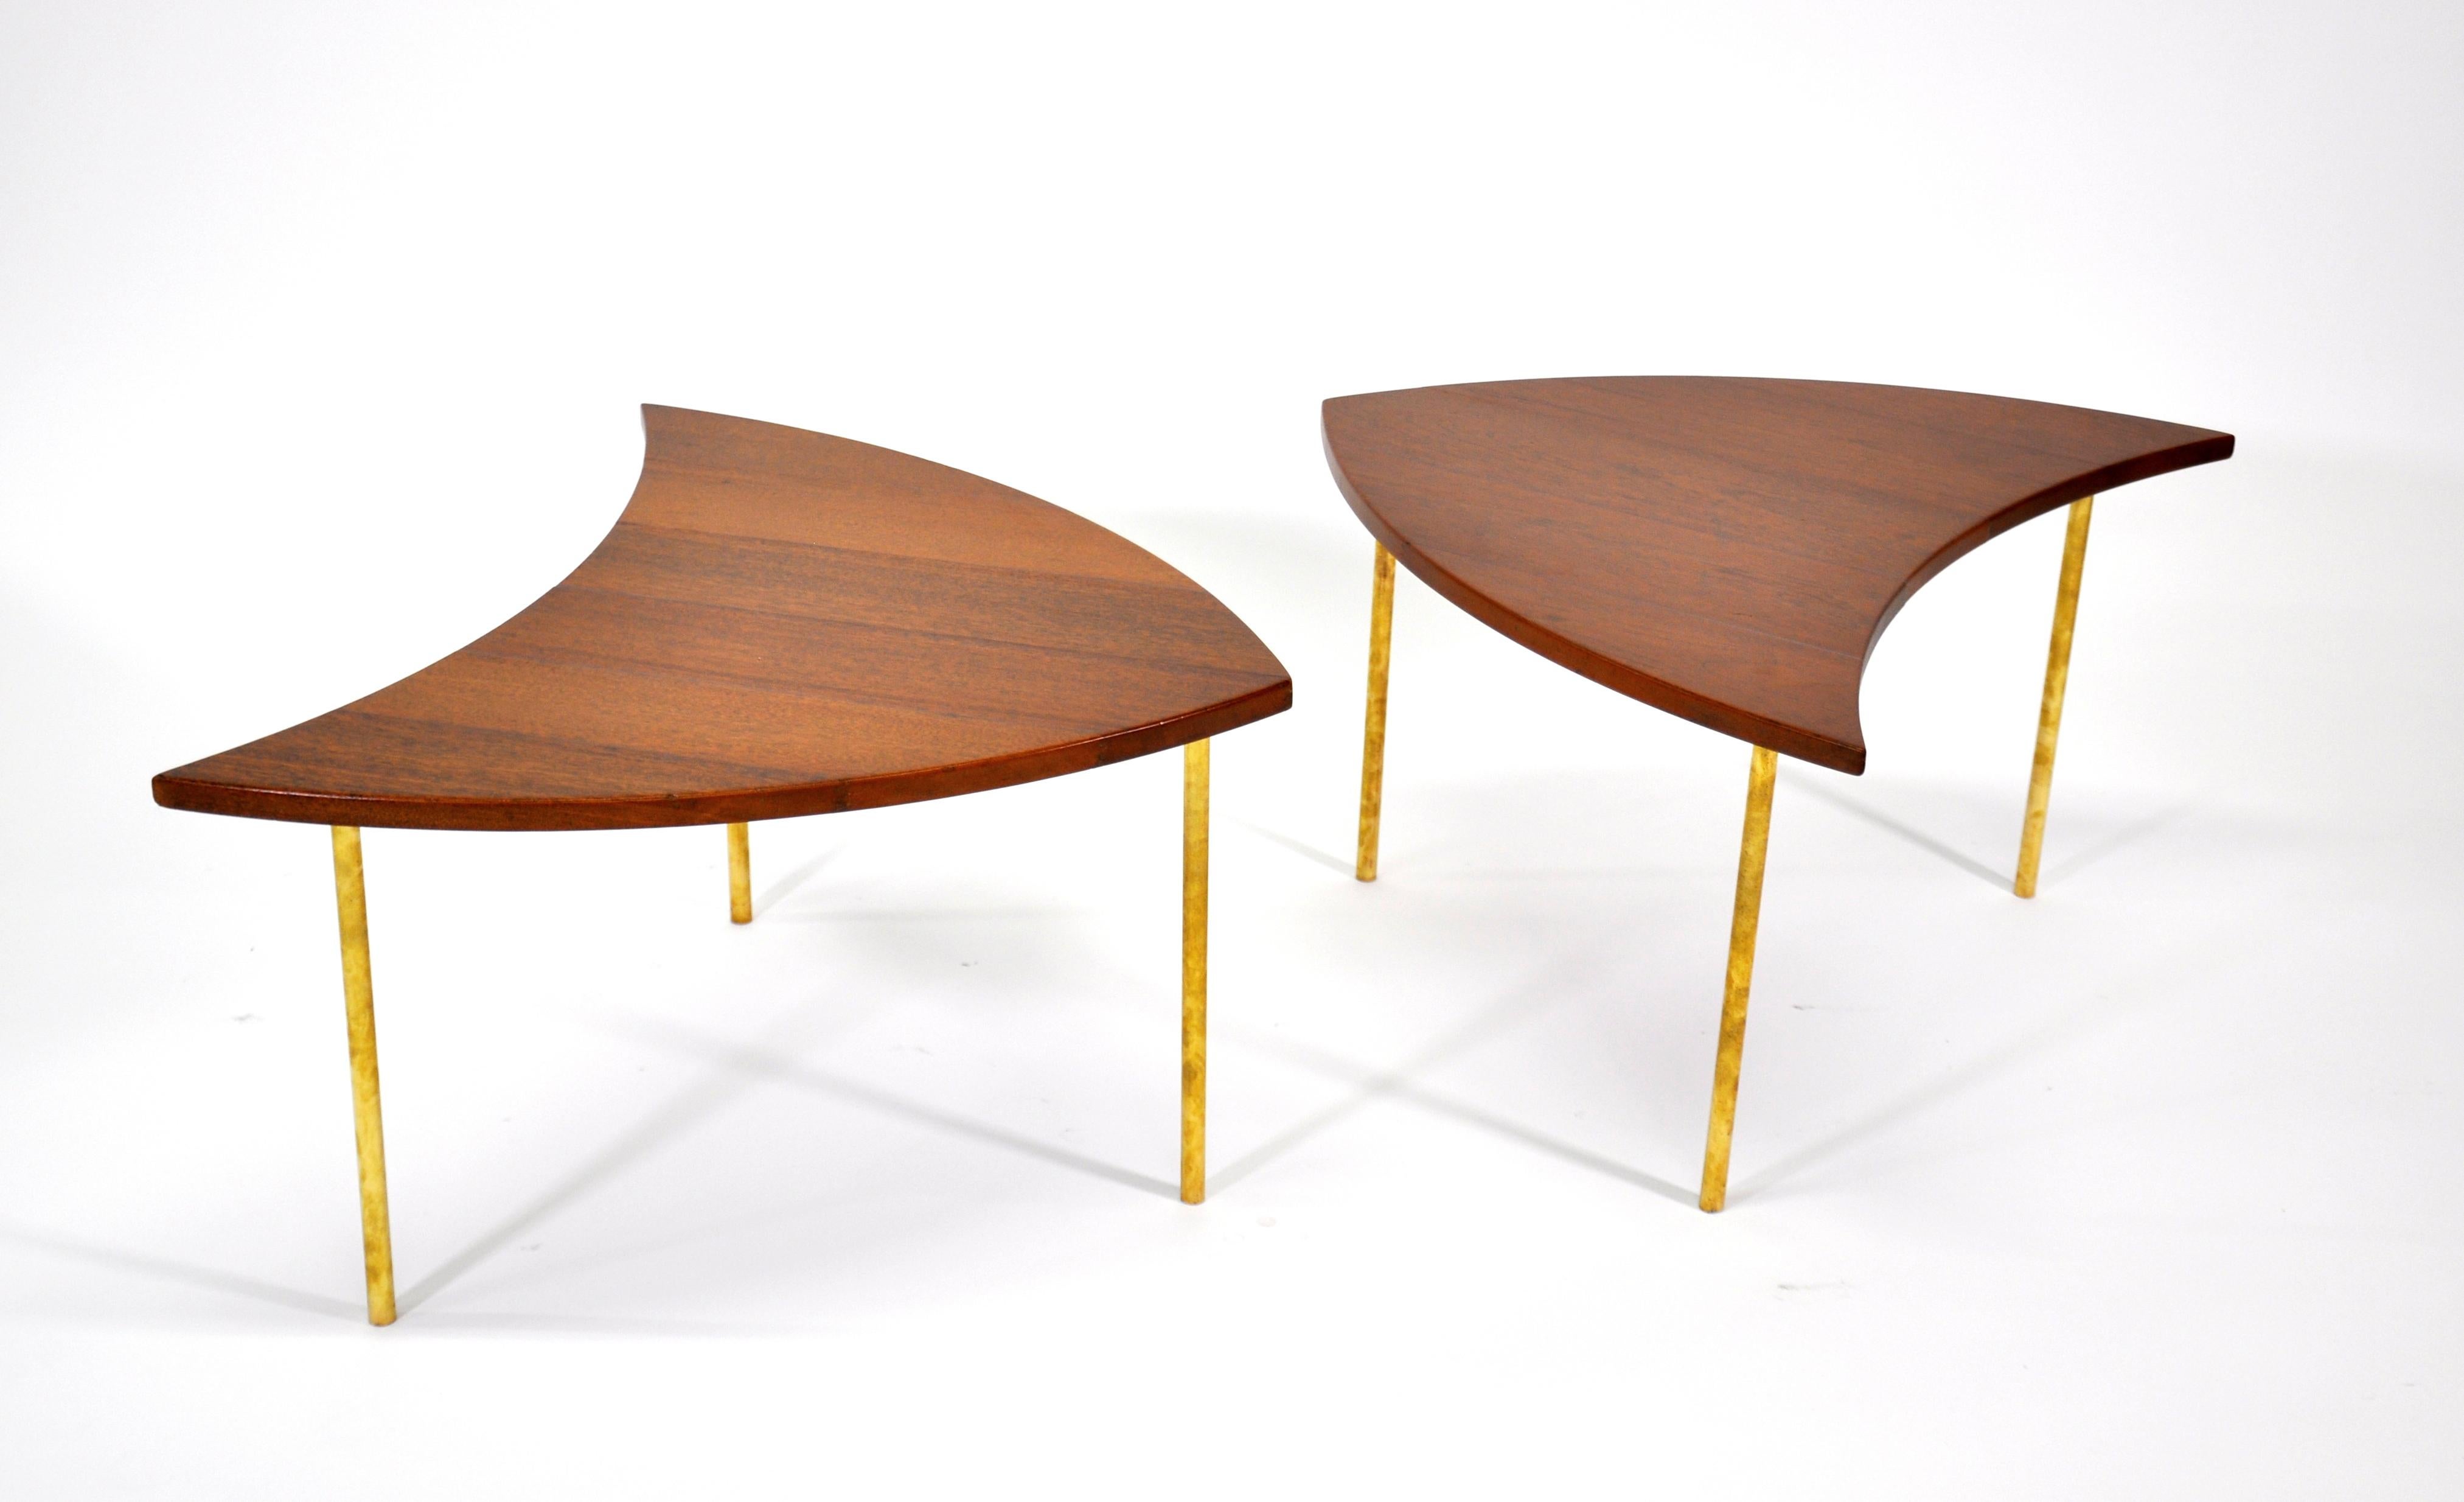 Pair of midcentury Danish modern interlocking modular model 523 end tables from the segmented Pinwheel series designed by Peter Hvidt in 1952 for France and Daverkosen (later renamed France and Son). The shield shaped occasional tables can be placed